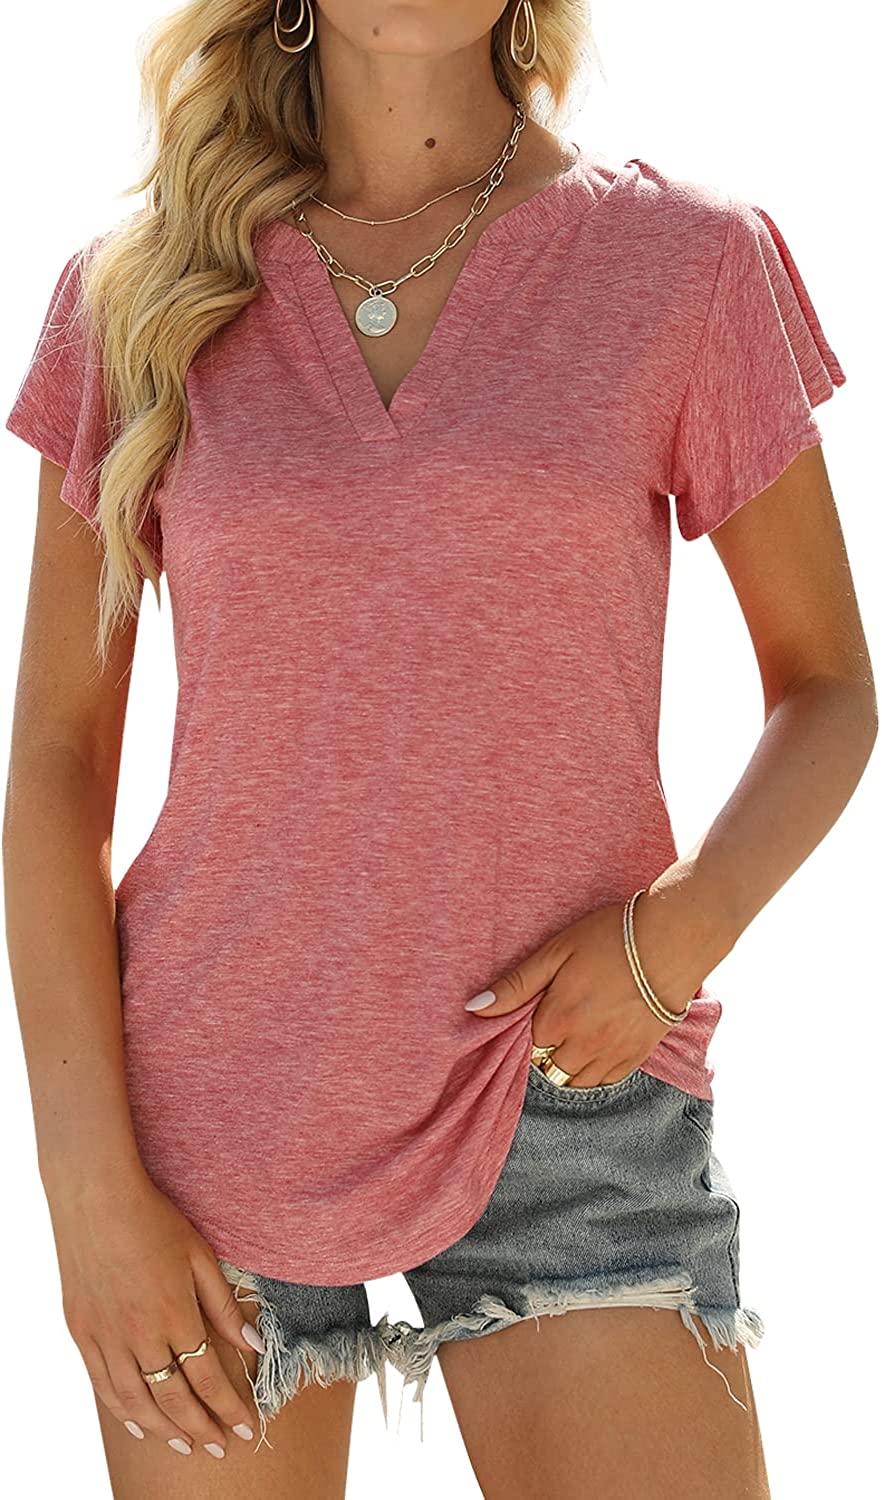  Womens Business Casual Tops